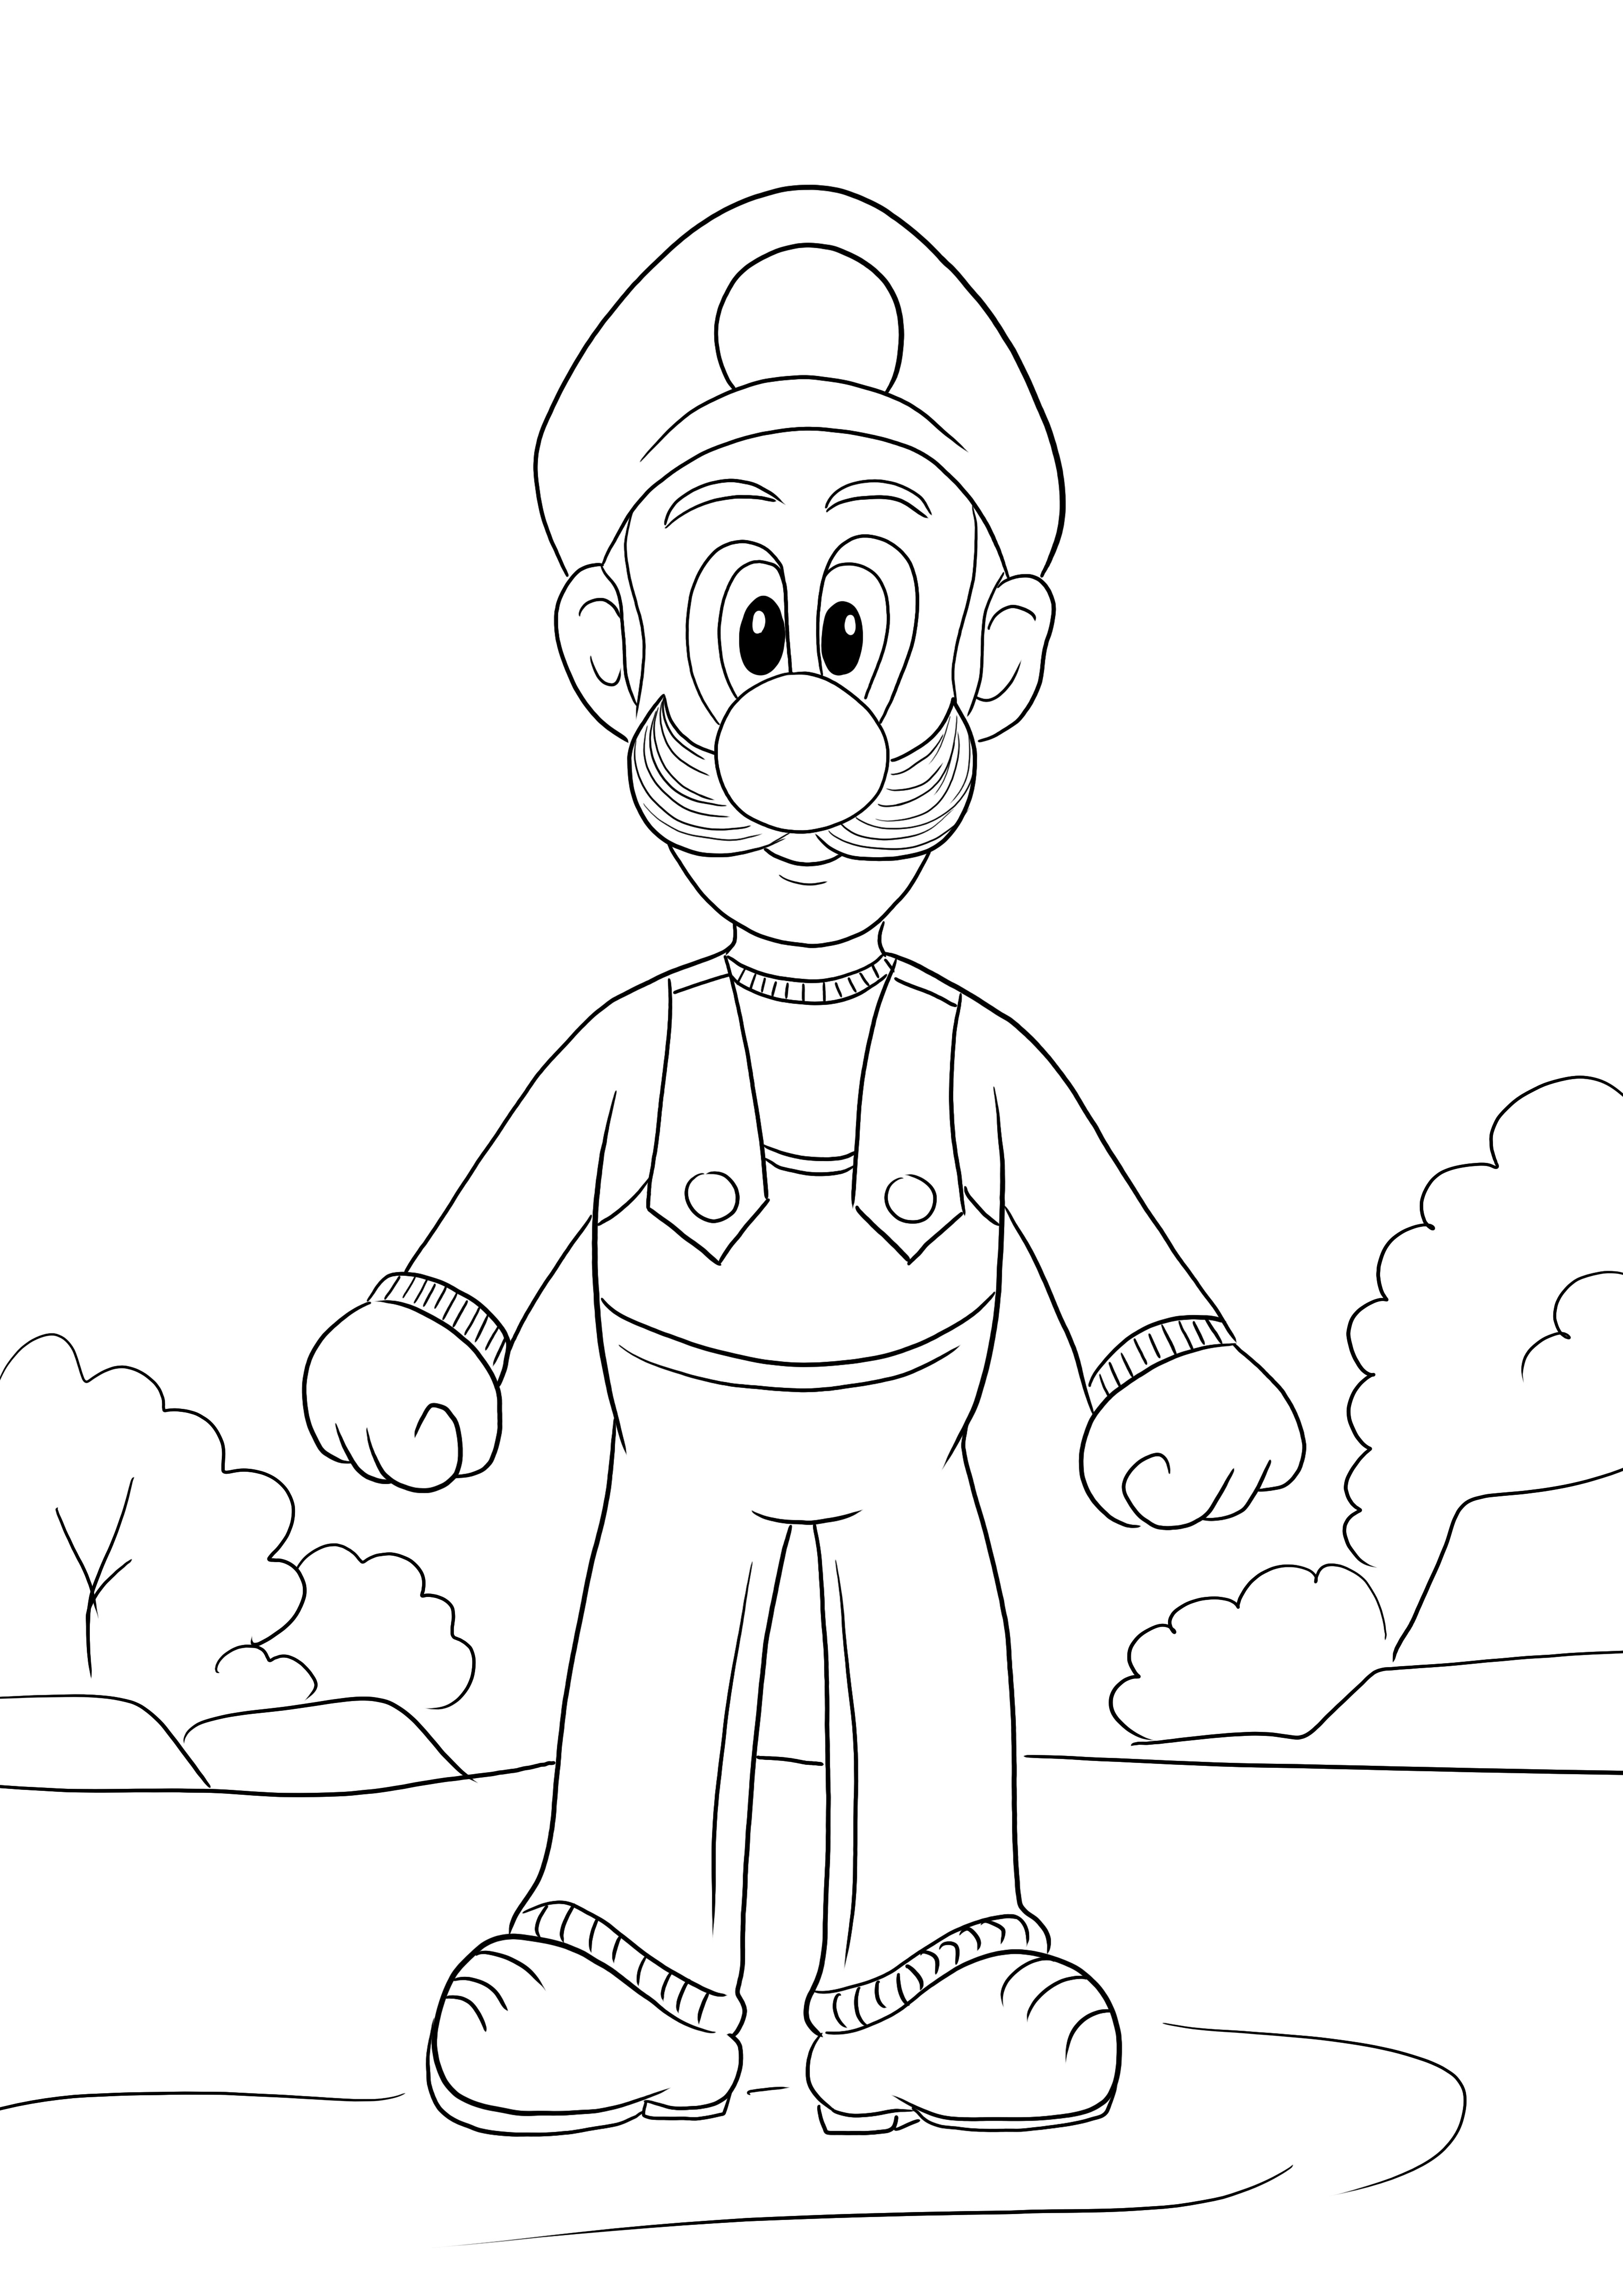 Here is a free coloring image of Luigi from the Super Mario game to download or free print